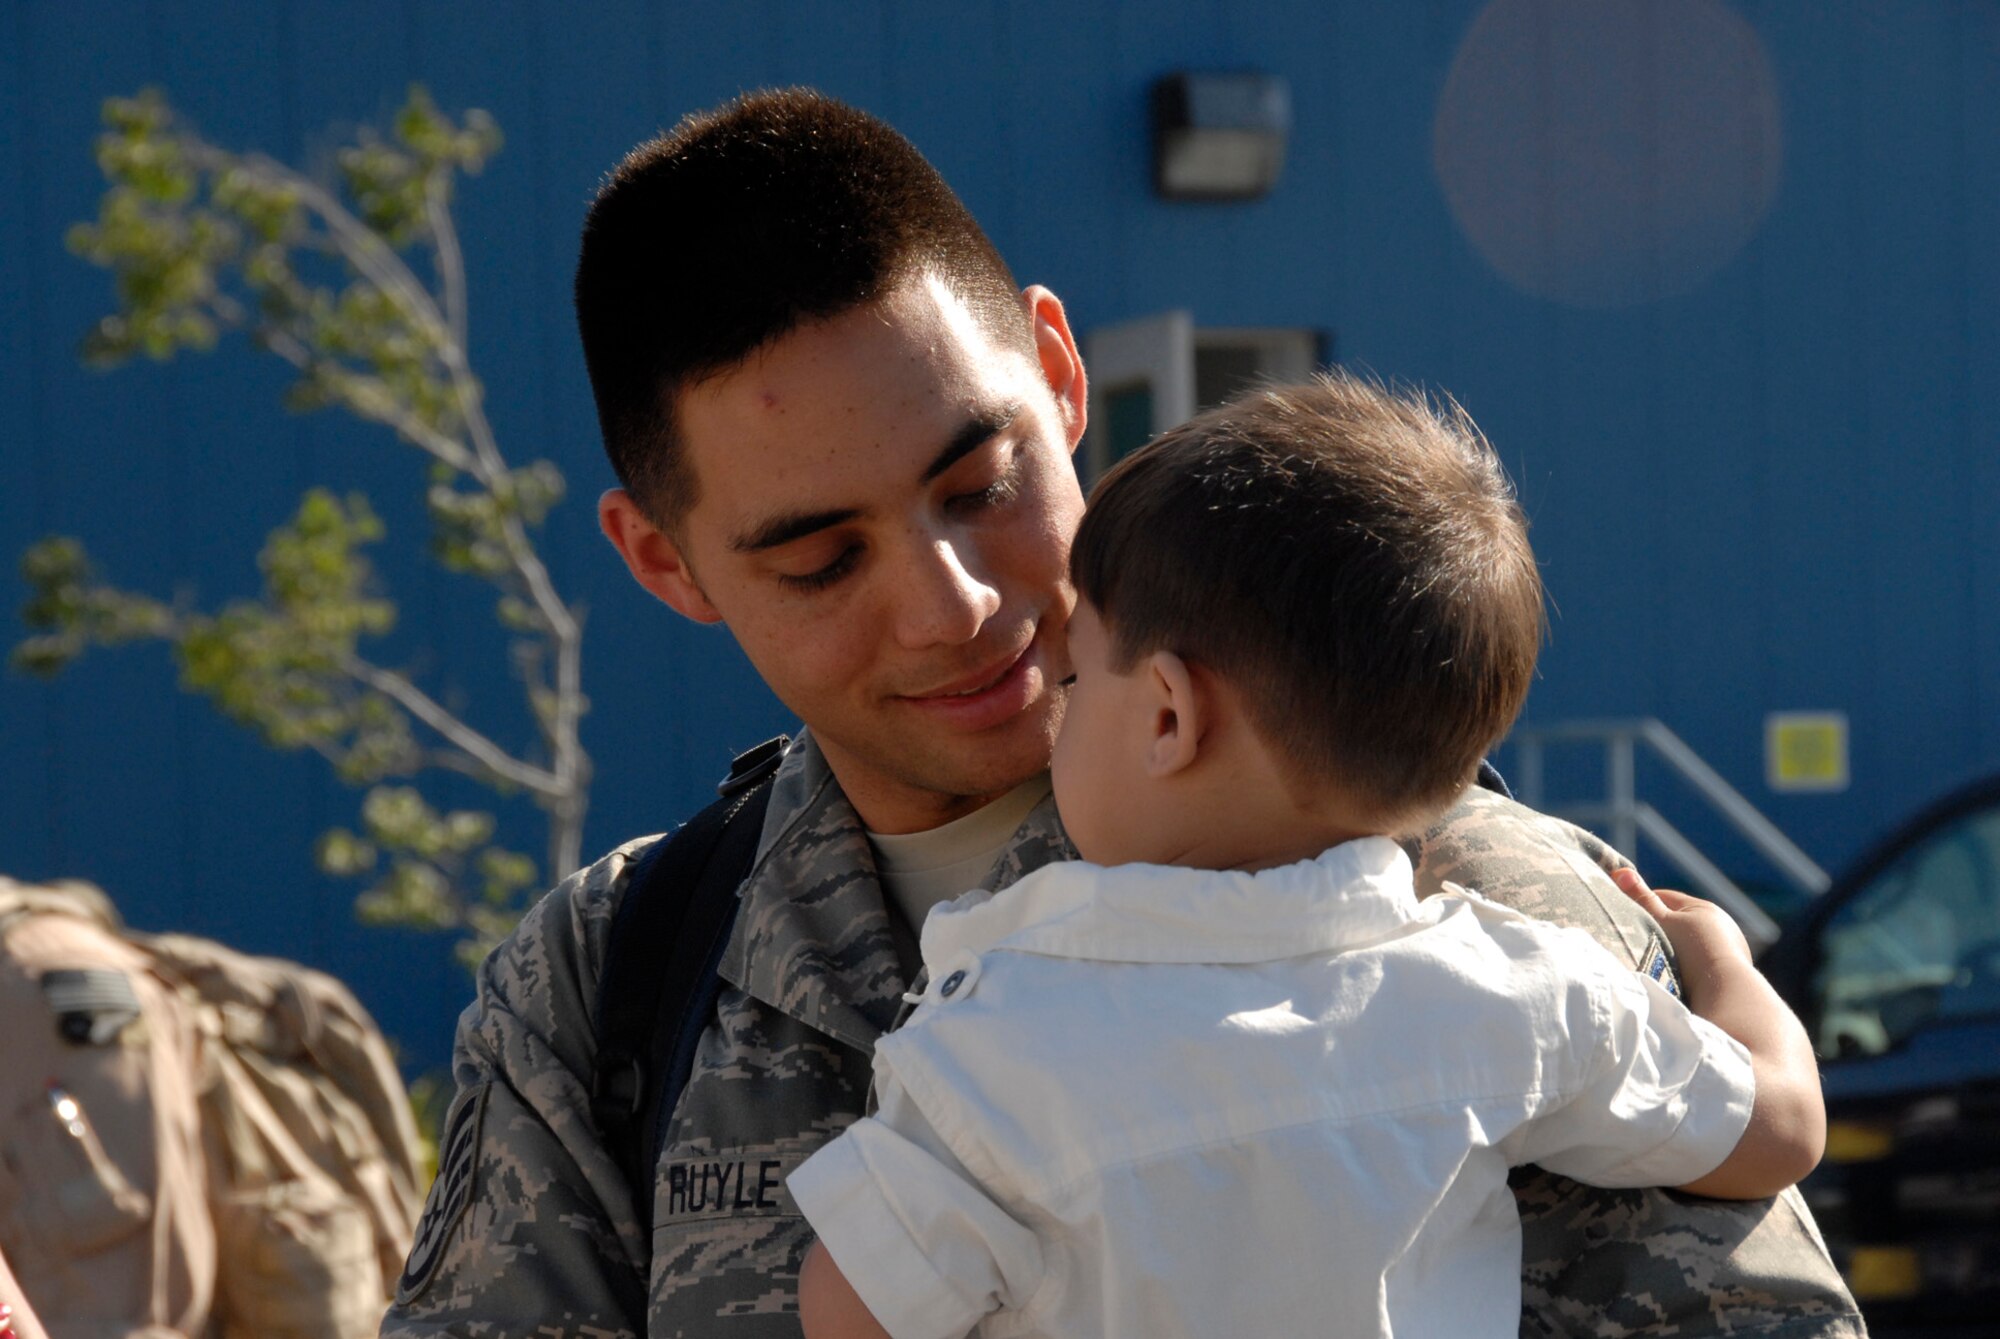 Staff Sgt. Michael Ruyle, an avionics specialist from the 129th Maintenance Squadron, spends time with his son upon his return home to Moffett Federal Airfield, Calif., after a two-month deployment to Afghanistan, July 9.  (Air National Guard photo by Tech. Sgt. Ray Aquino)(RELEASED)